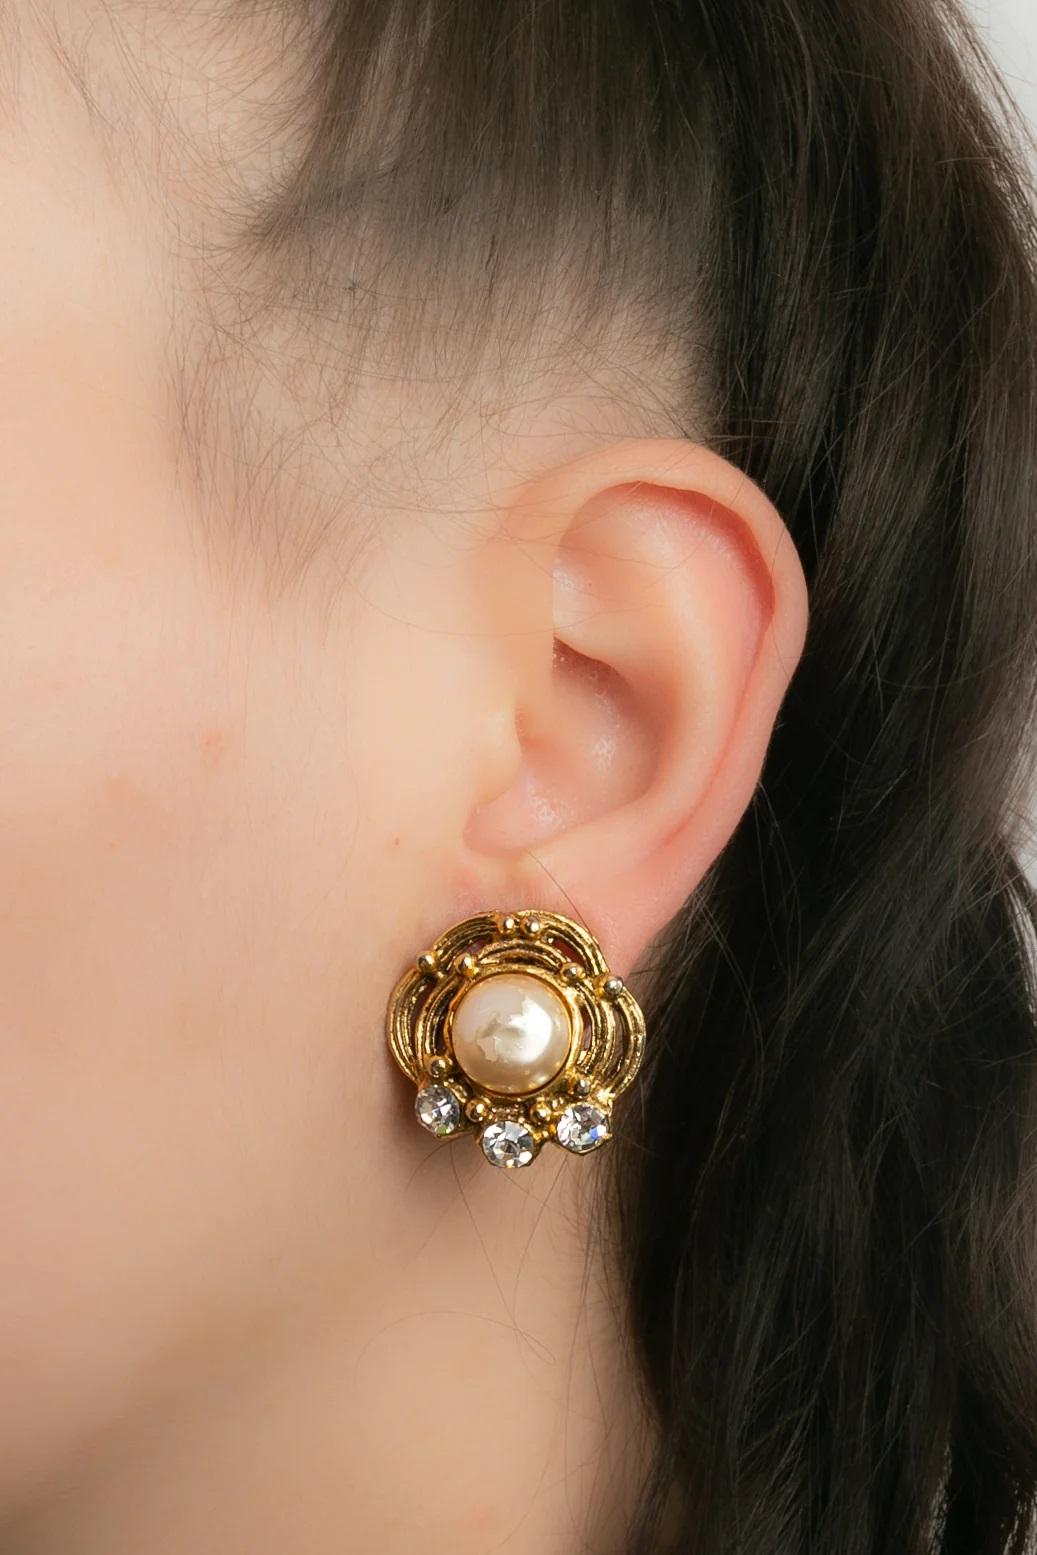 Chanel- (Made in France) Clip-on gilded metal earrings decorated with a pearly cabochon and rhinestones.

Additional information:
Dimensions: 2.5 W x 2.5 H cm (0.98